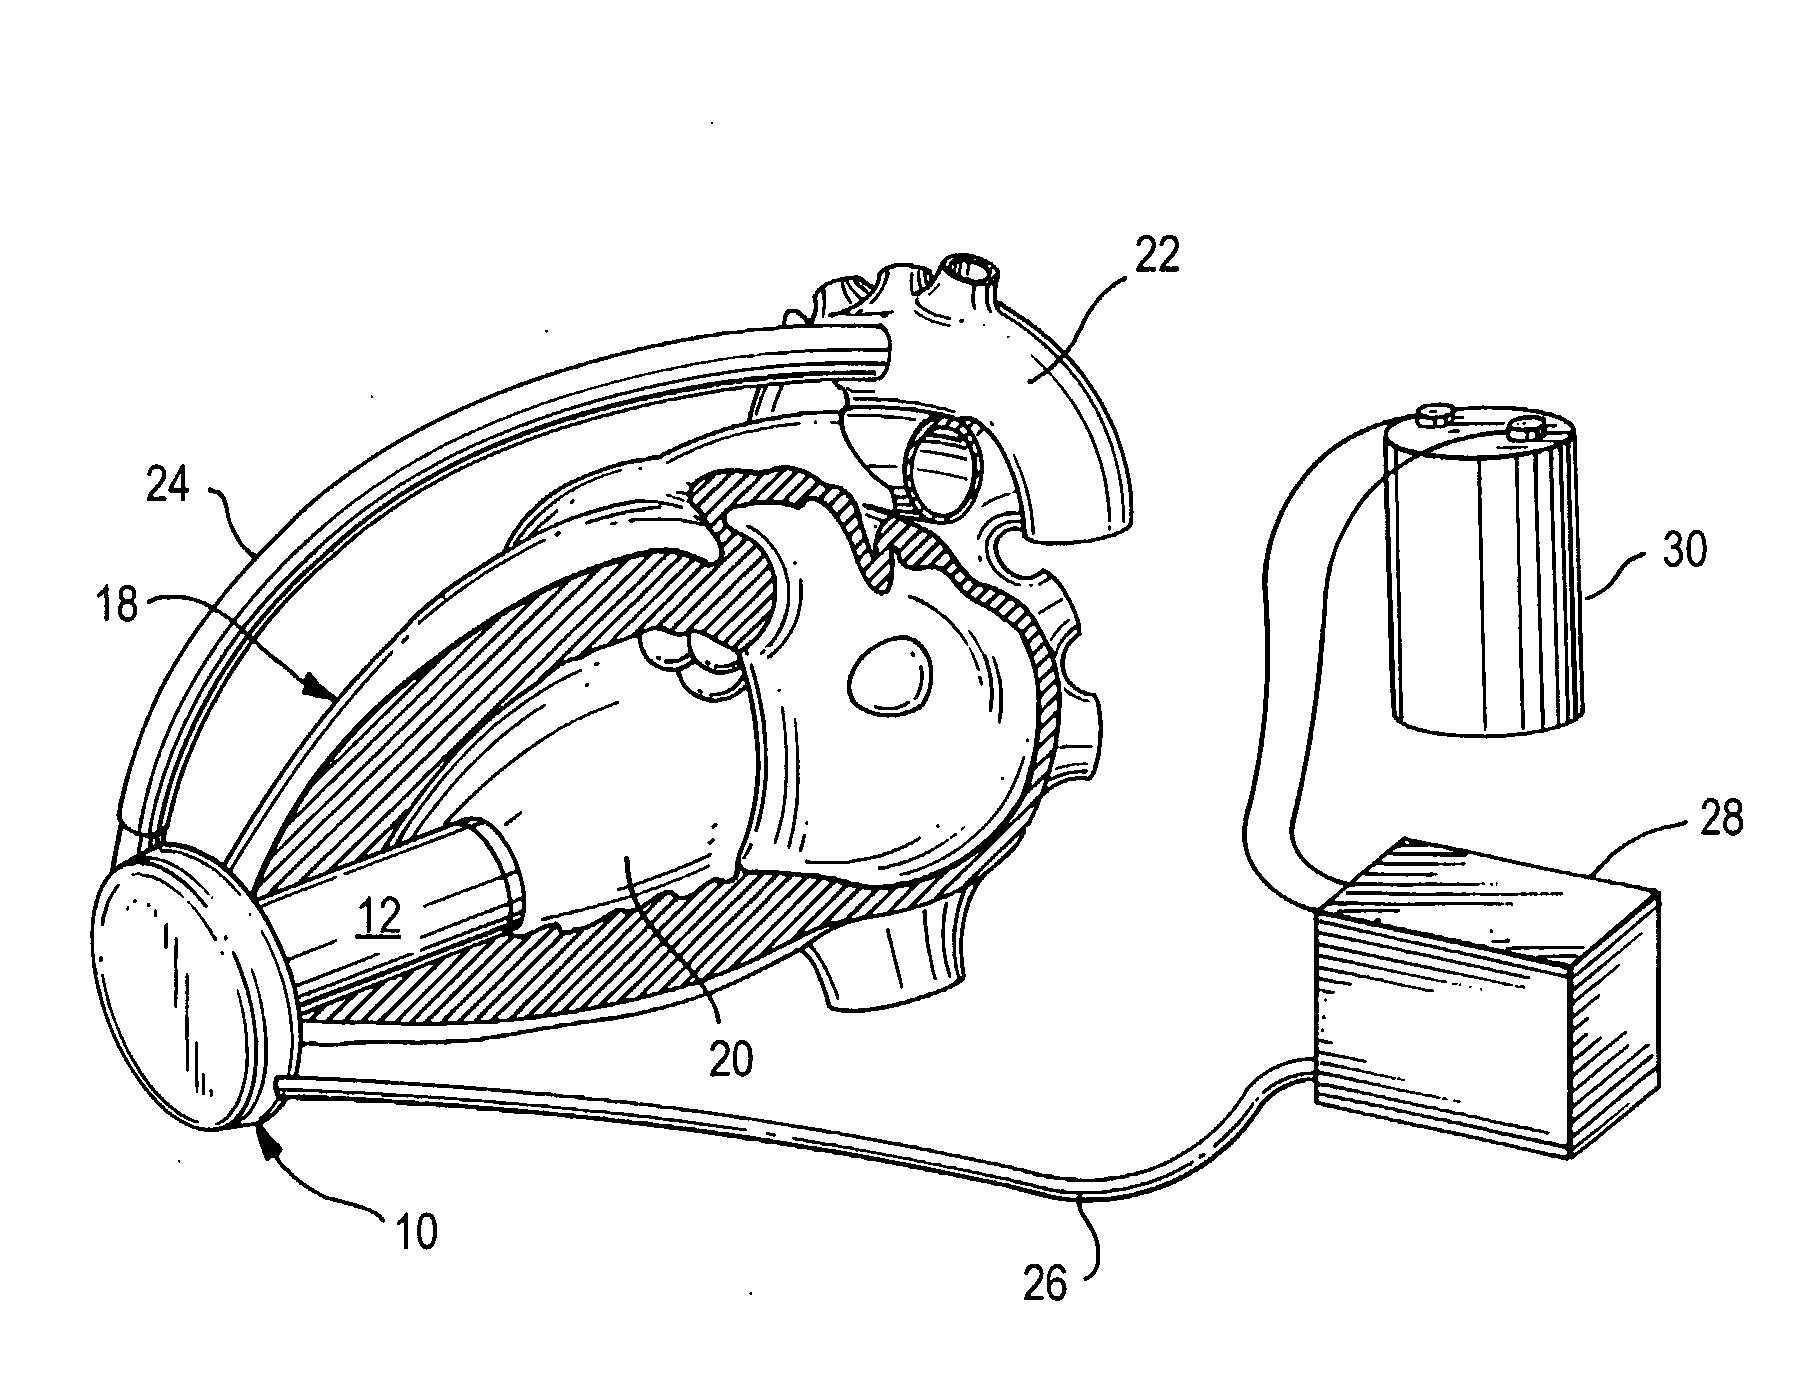 Sensorless Flow Estimation for Implanted Ventricle Assist Device